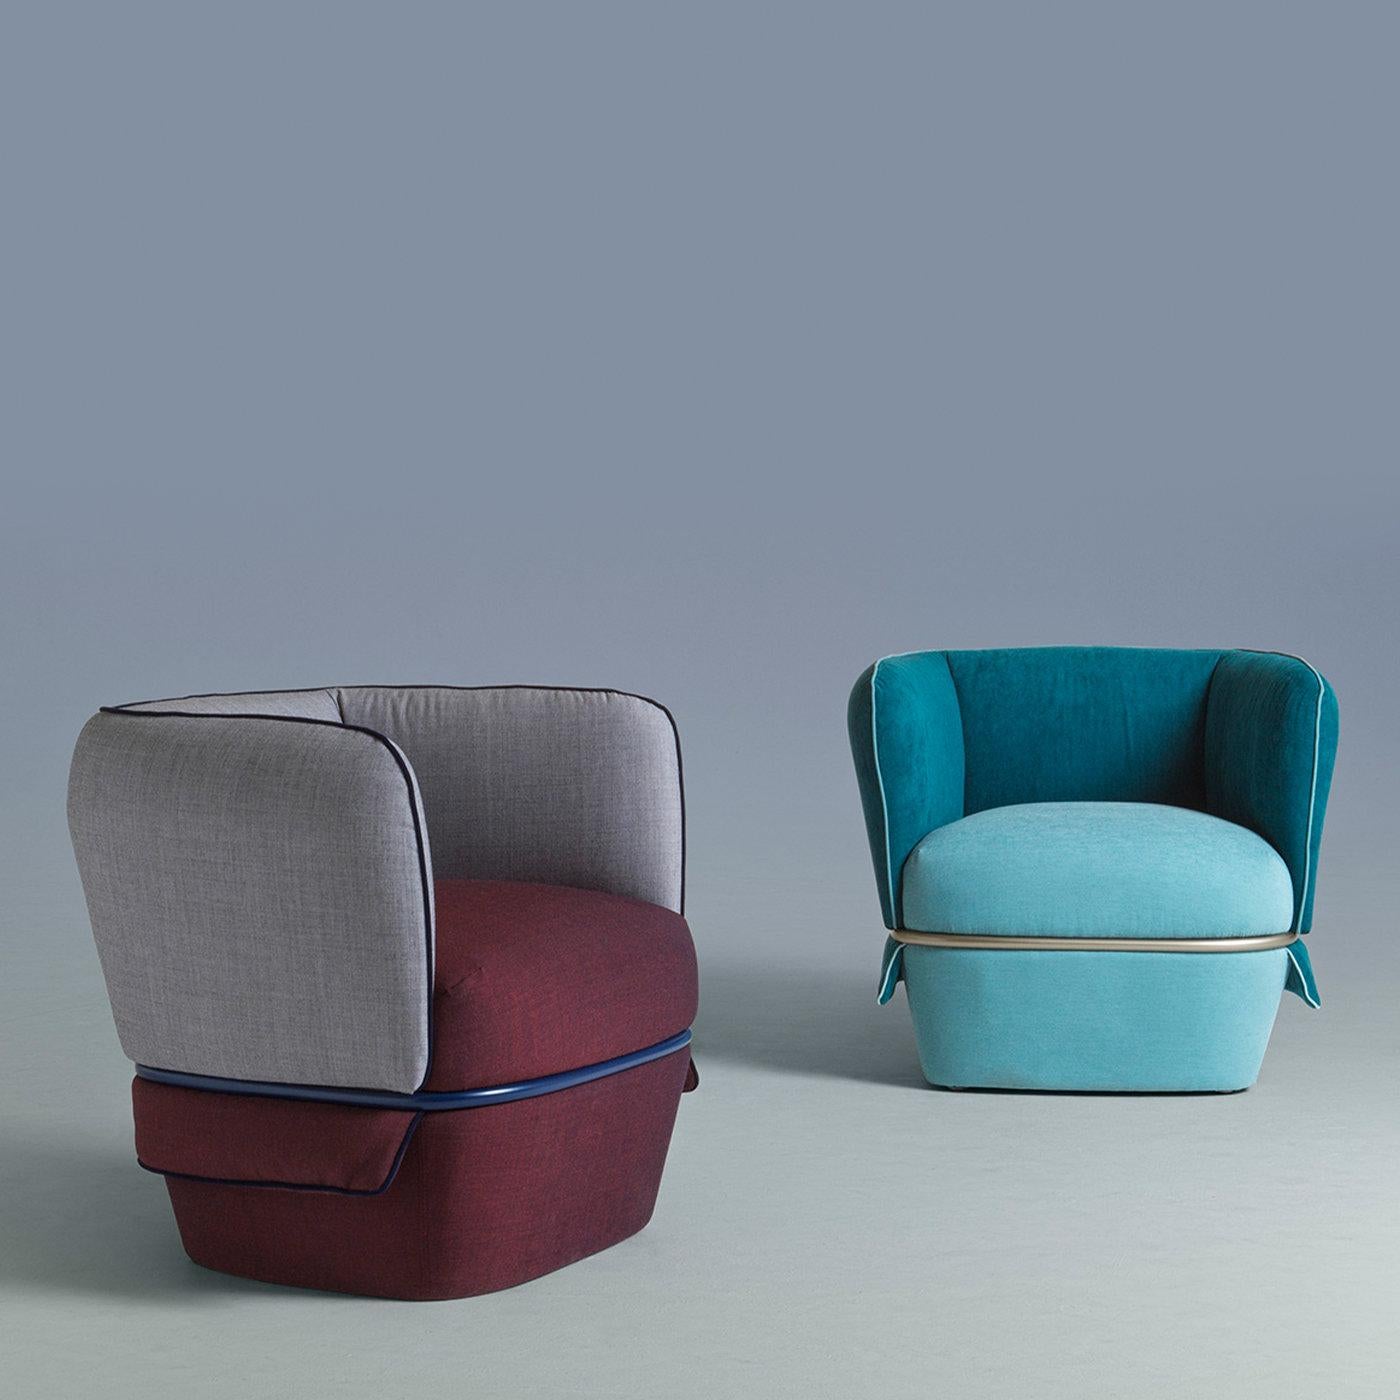 Covered in a combination of stain-resistant peachskin fabric in petrol-blue for the backrest and armrests and aquamarine for the plush seat (45cm high), this armchair exudes pure coziness. The wooden frame is padded with multi-density polyurethane